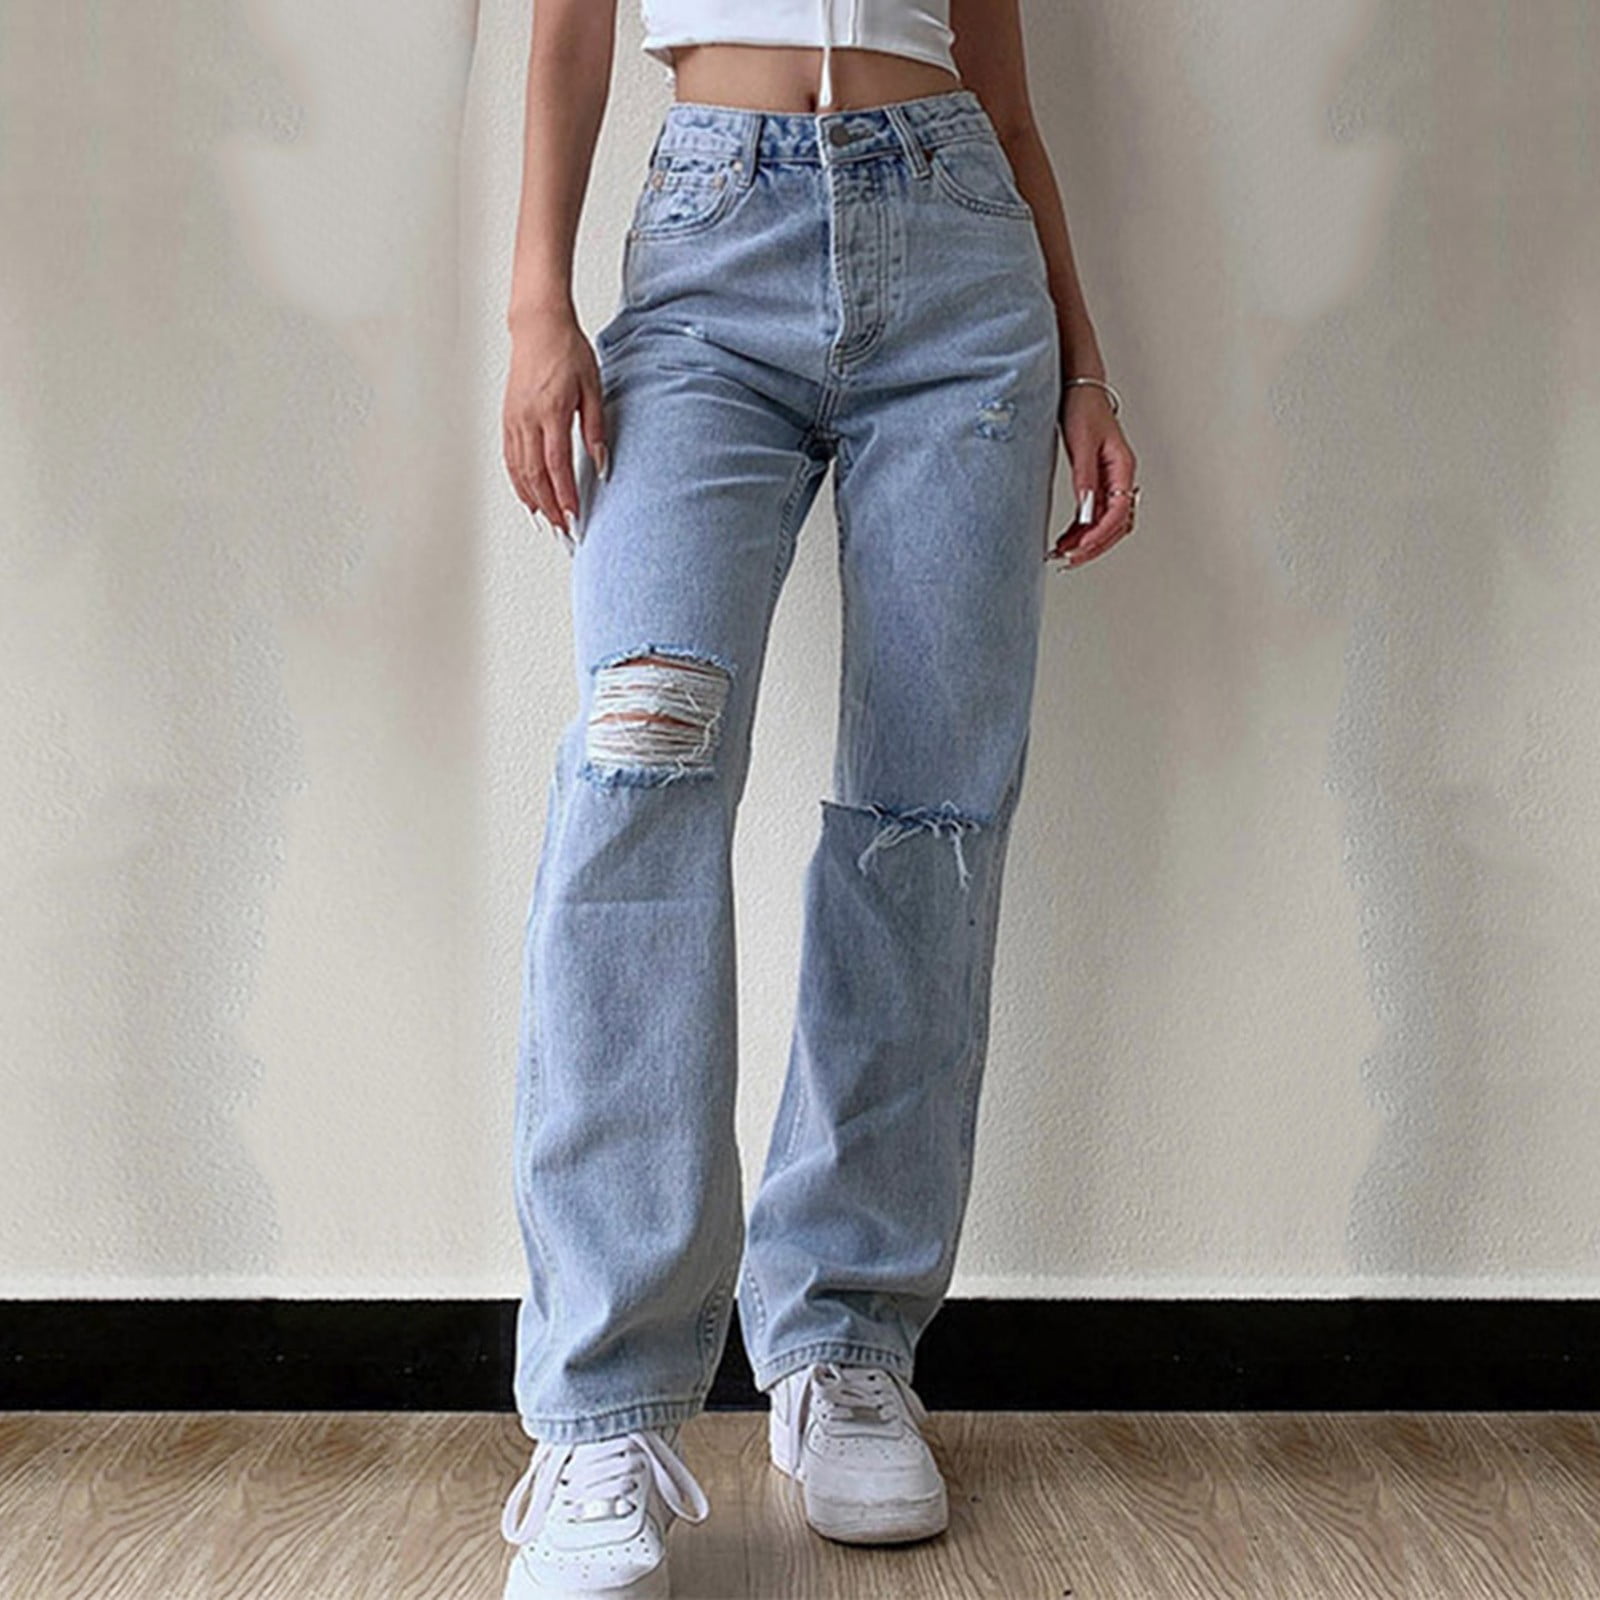 How to Style Baggy Jeans | POPSUGAR Fashion